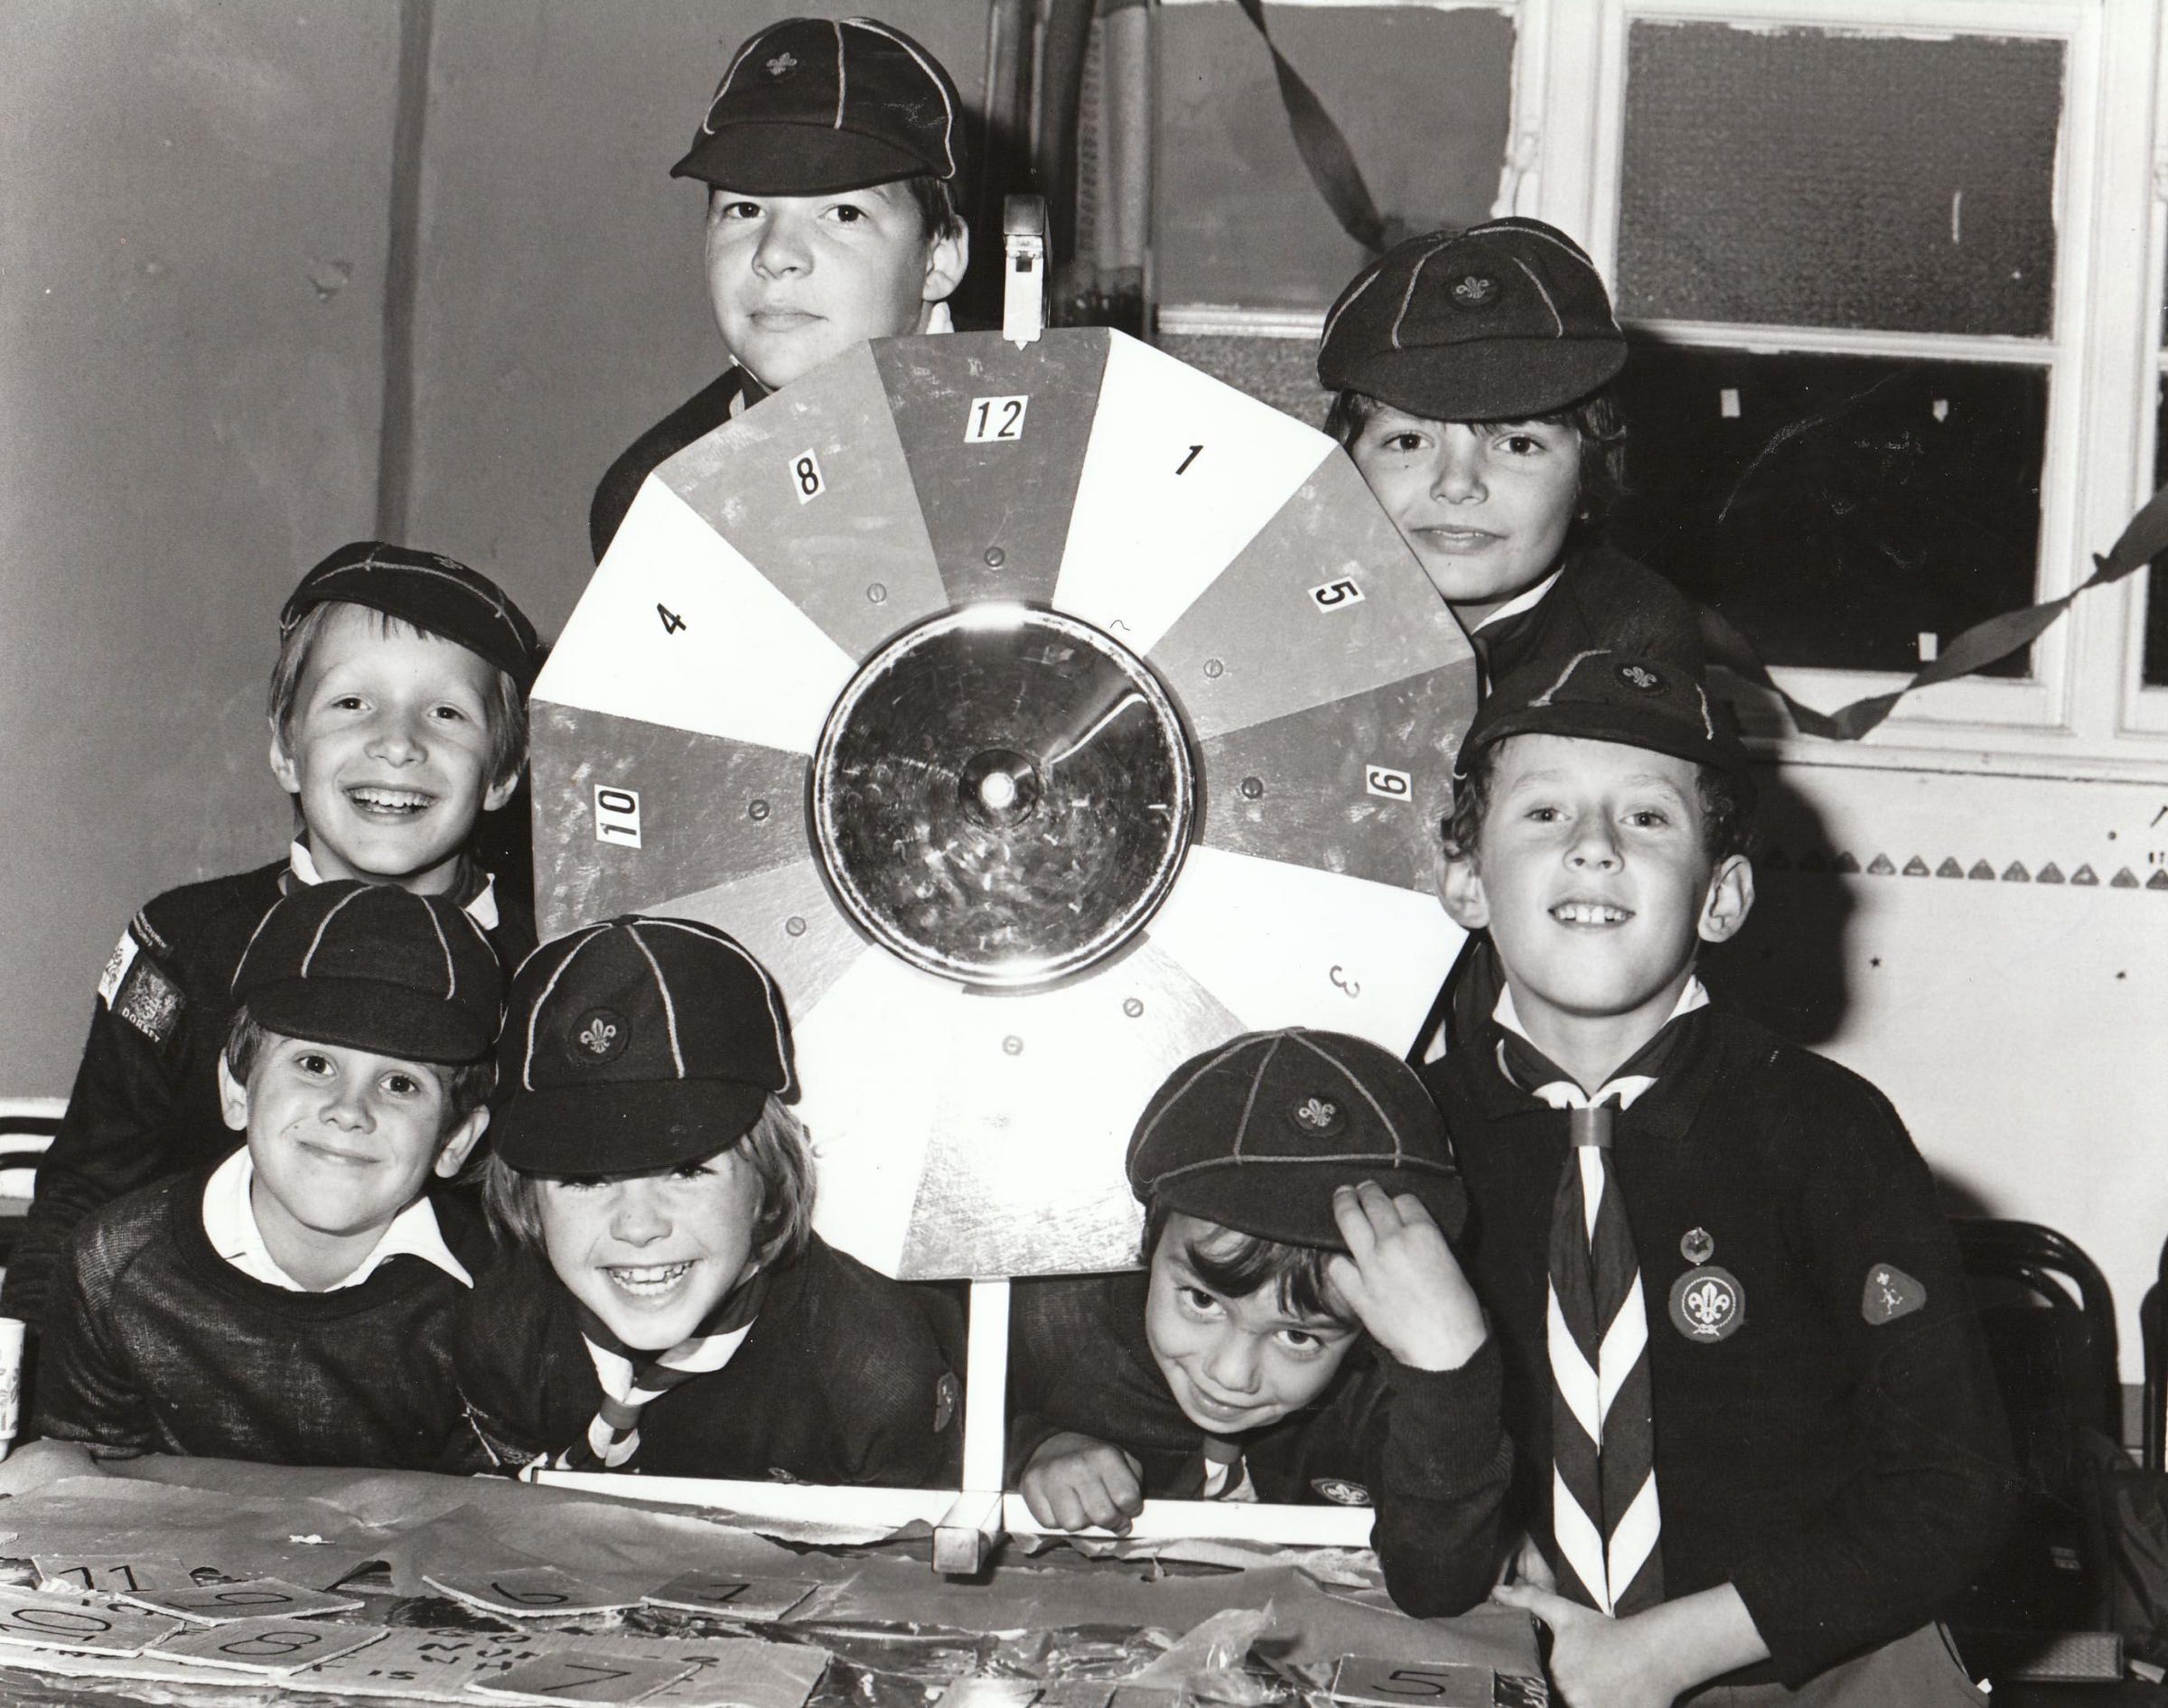 In Nov 1980 These Somerford Cub Scouts spinned the wheel of fortune for visitors at their Christmas fair.